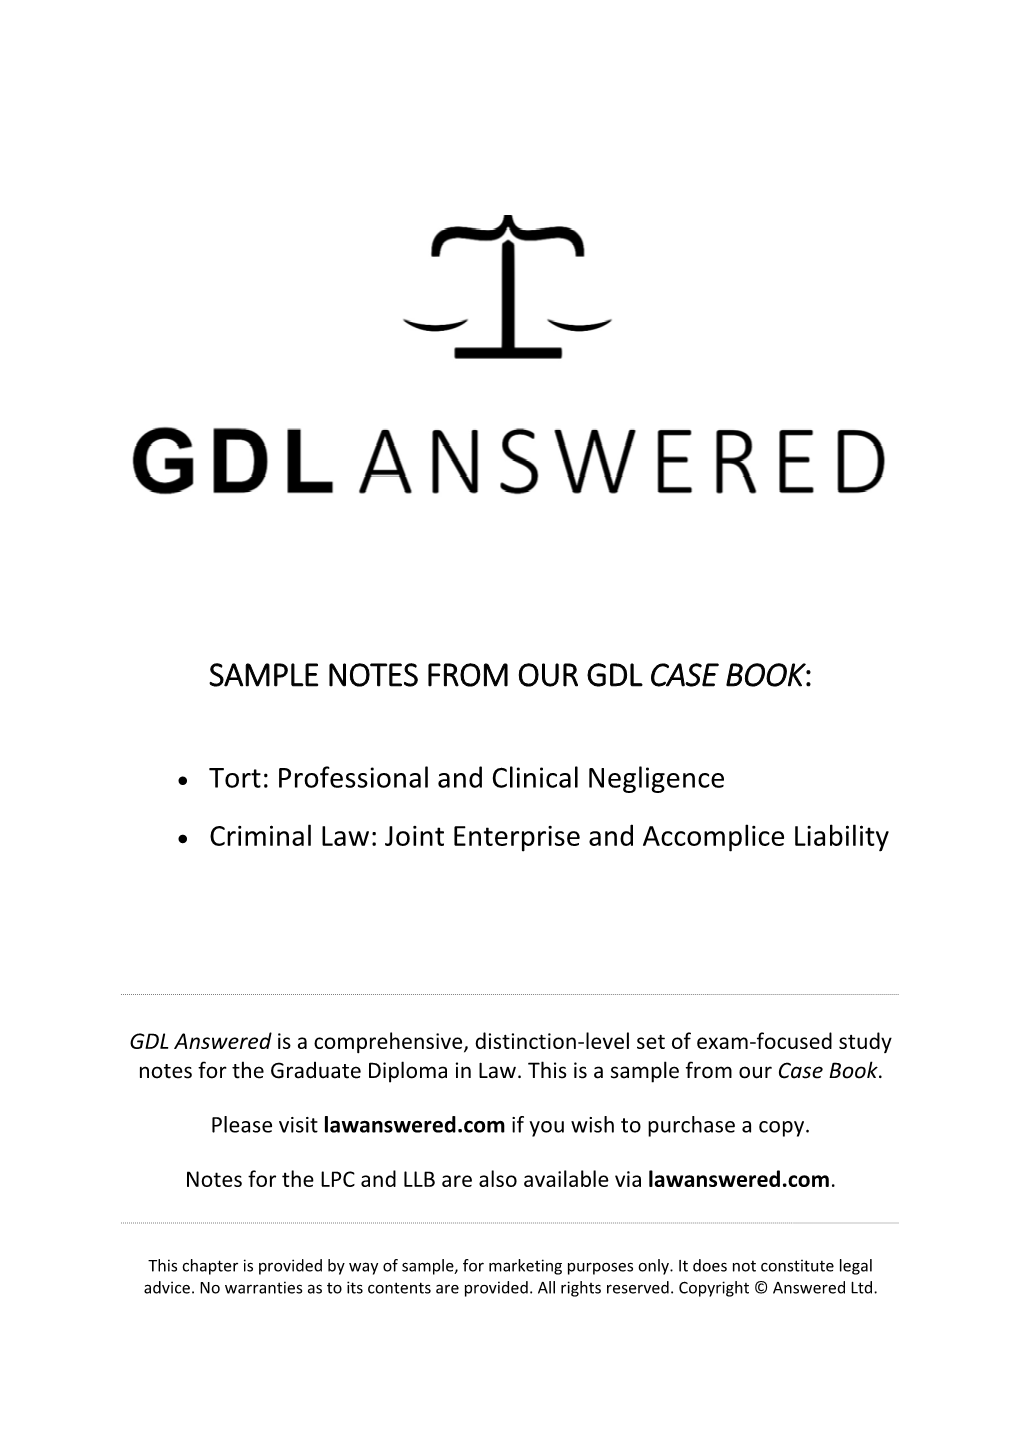 Frontplate GDL Answered Case Book